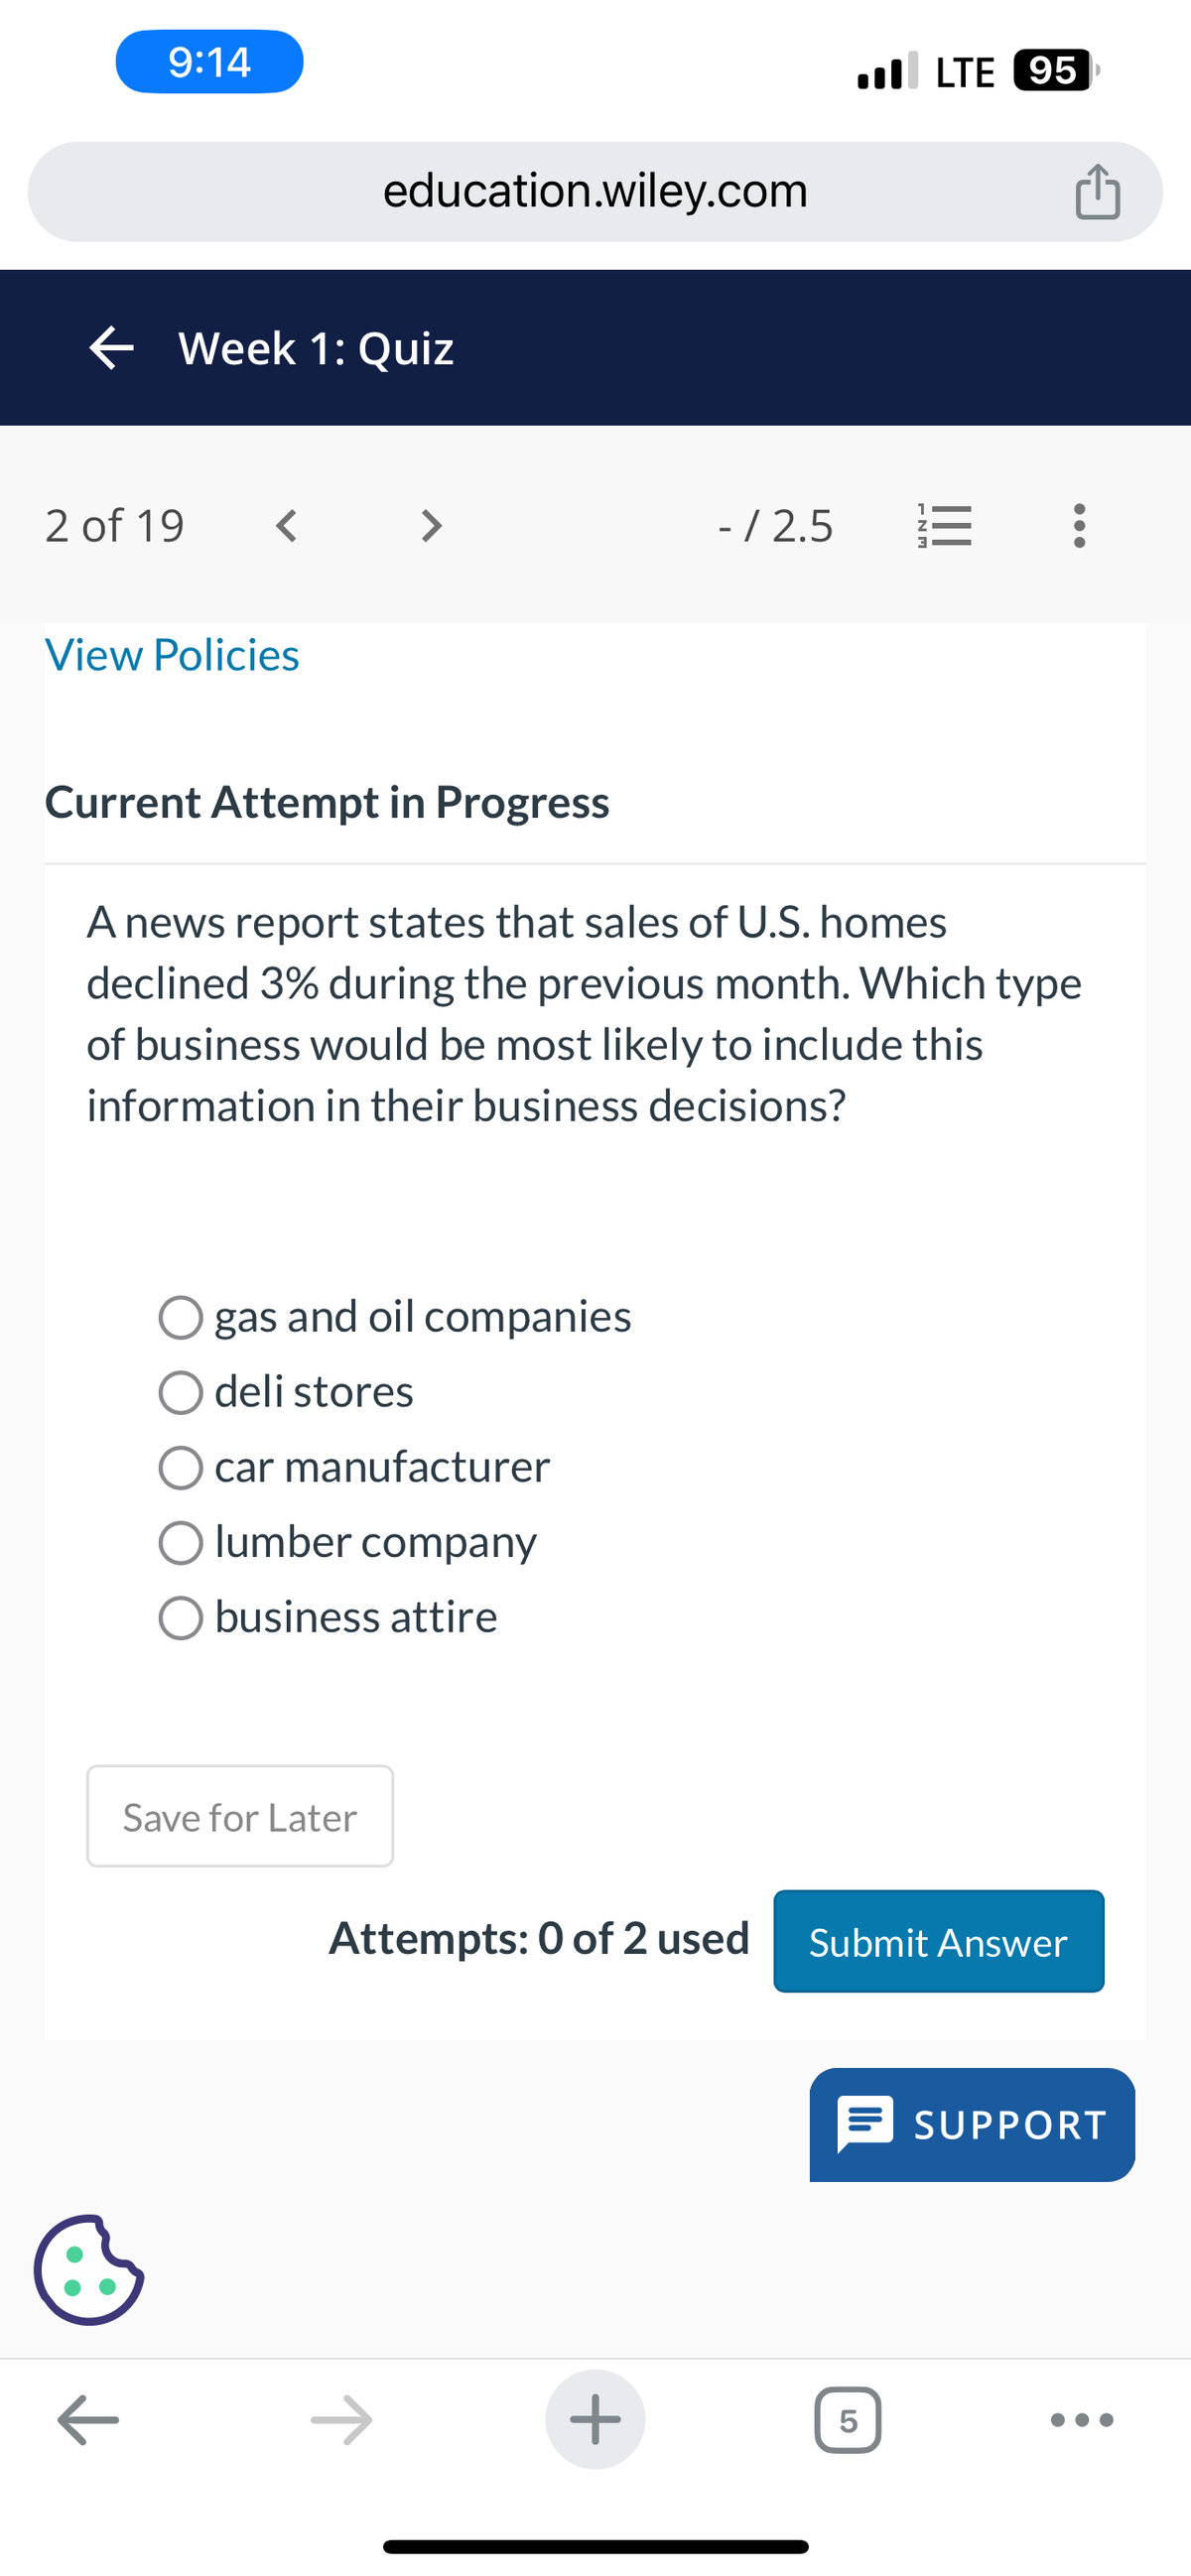 9:14
← Week 1: Quiz
2 of 19 <
View Policies
education.wiley.com
B
>
gas and oil companies
O deli stores
Current Attempt in Progress
A news report states that sales of U.S. homes
declined 3% during the previous month. Which type
of business would be most likely to include this
information in their business decisions?
Save for Later
car manufacturer
lumber company
business attire
- / 2.5
+
LTE 95
13:
Attempts: 0 of 2 used Submit Answer
5
SUPPORT